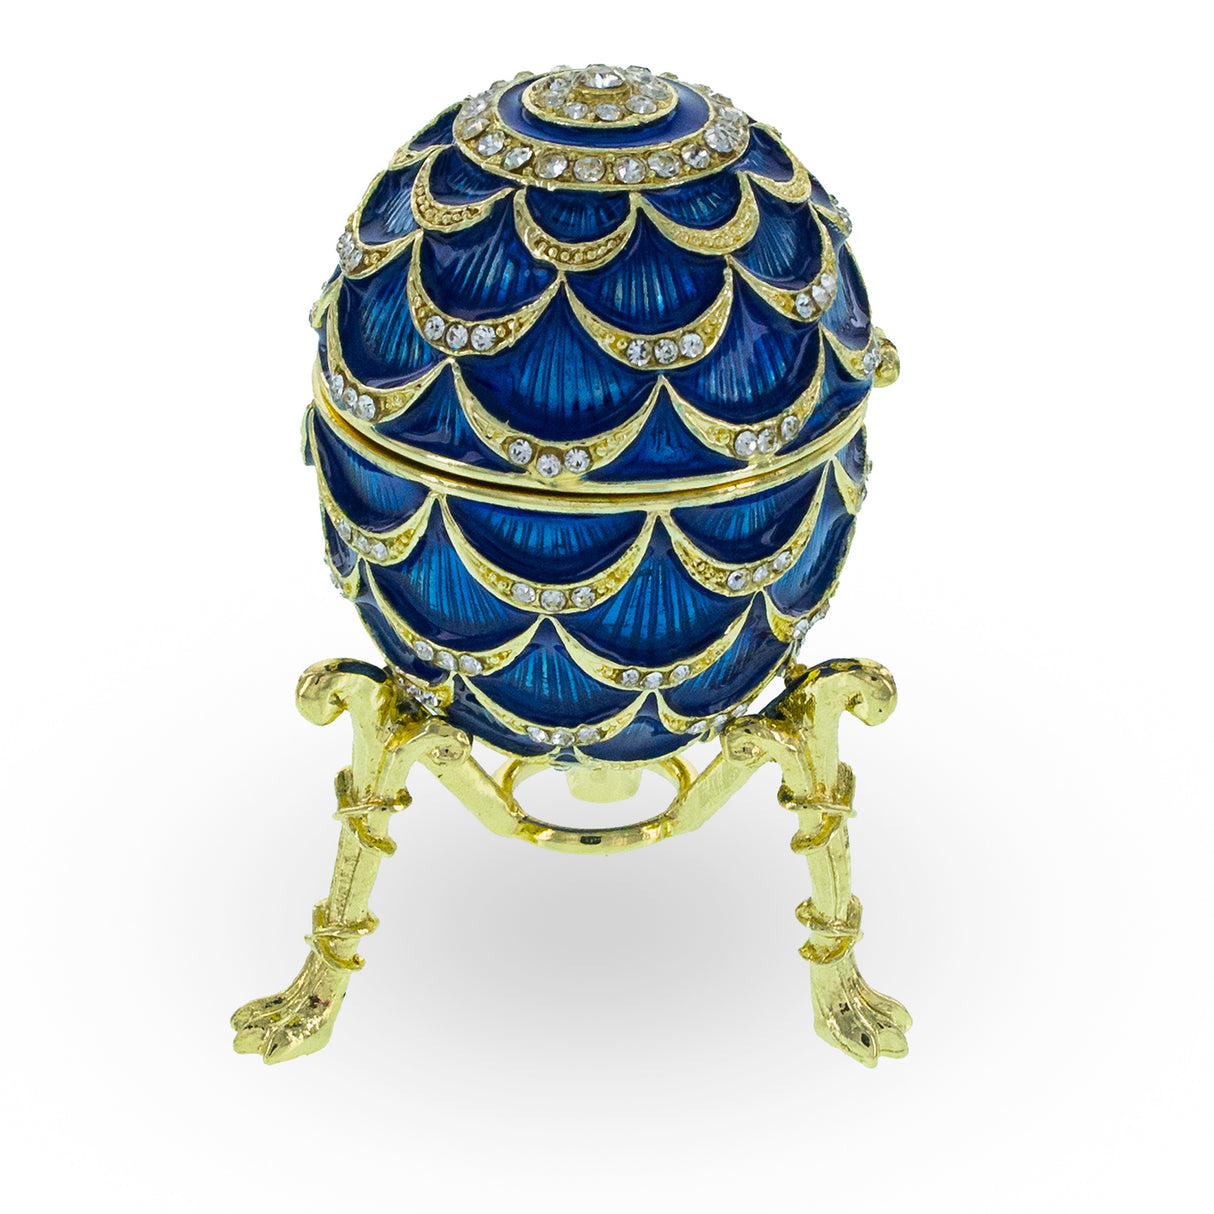 Shop Blue Enamel Pinecone Royal Inspired Imperial Easter Egg with Clock. Buy Royal Royal Eggs Inspired Blue Oval Pewter for Sale by Online Gift Shop BestPysanky Faberge replicas Imperial royal collectible Easter egg decorative Russian inspired style jewelry trinket box bejeweled jeweled enameled decoration figurine collection house music box crystal value for sale real